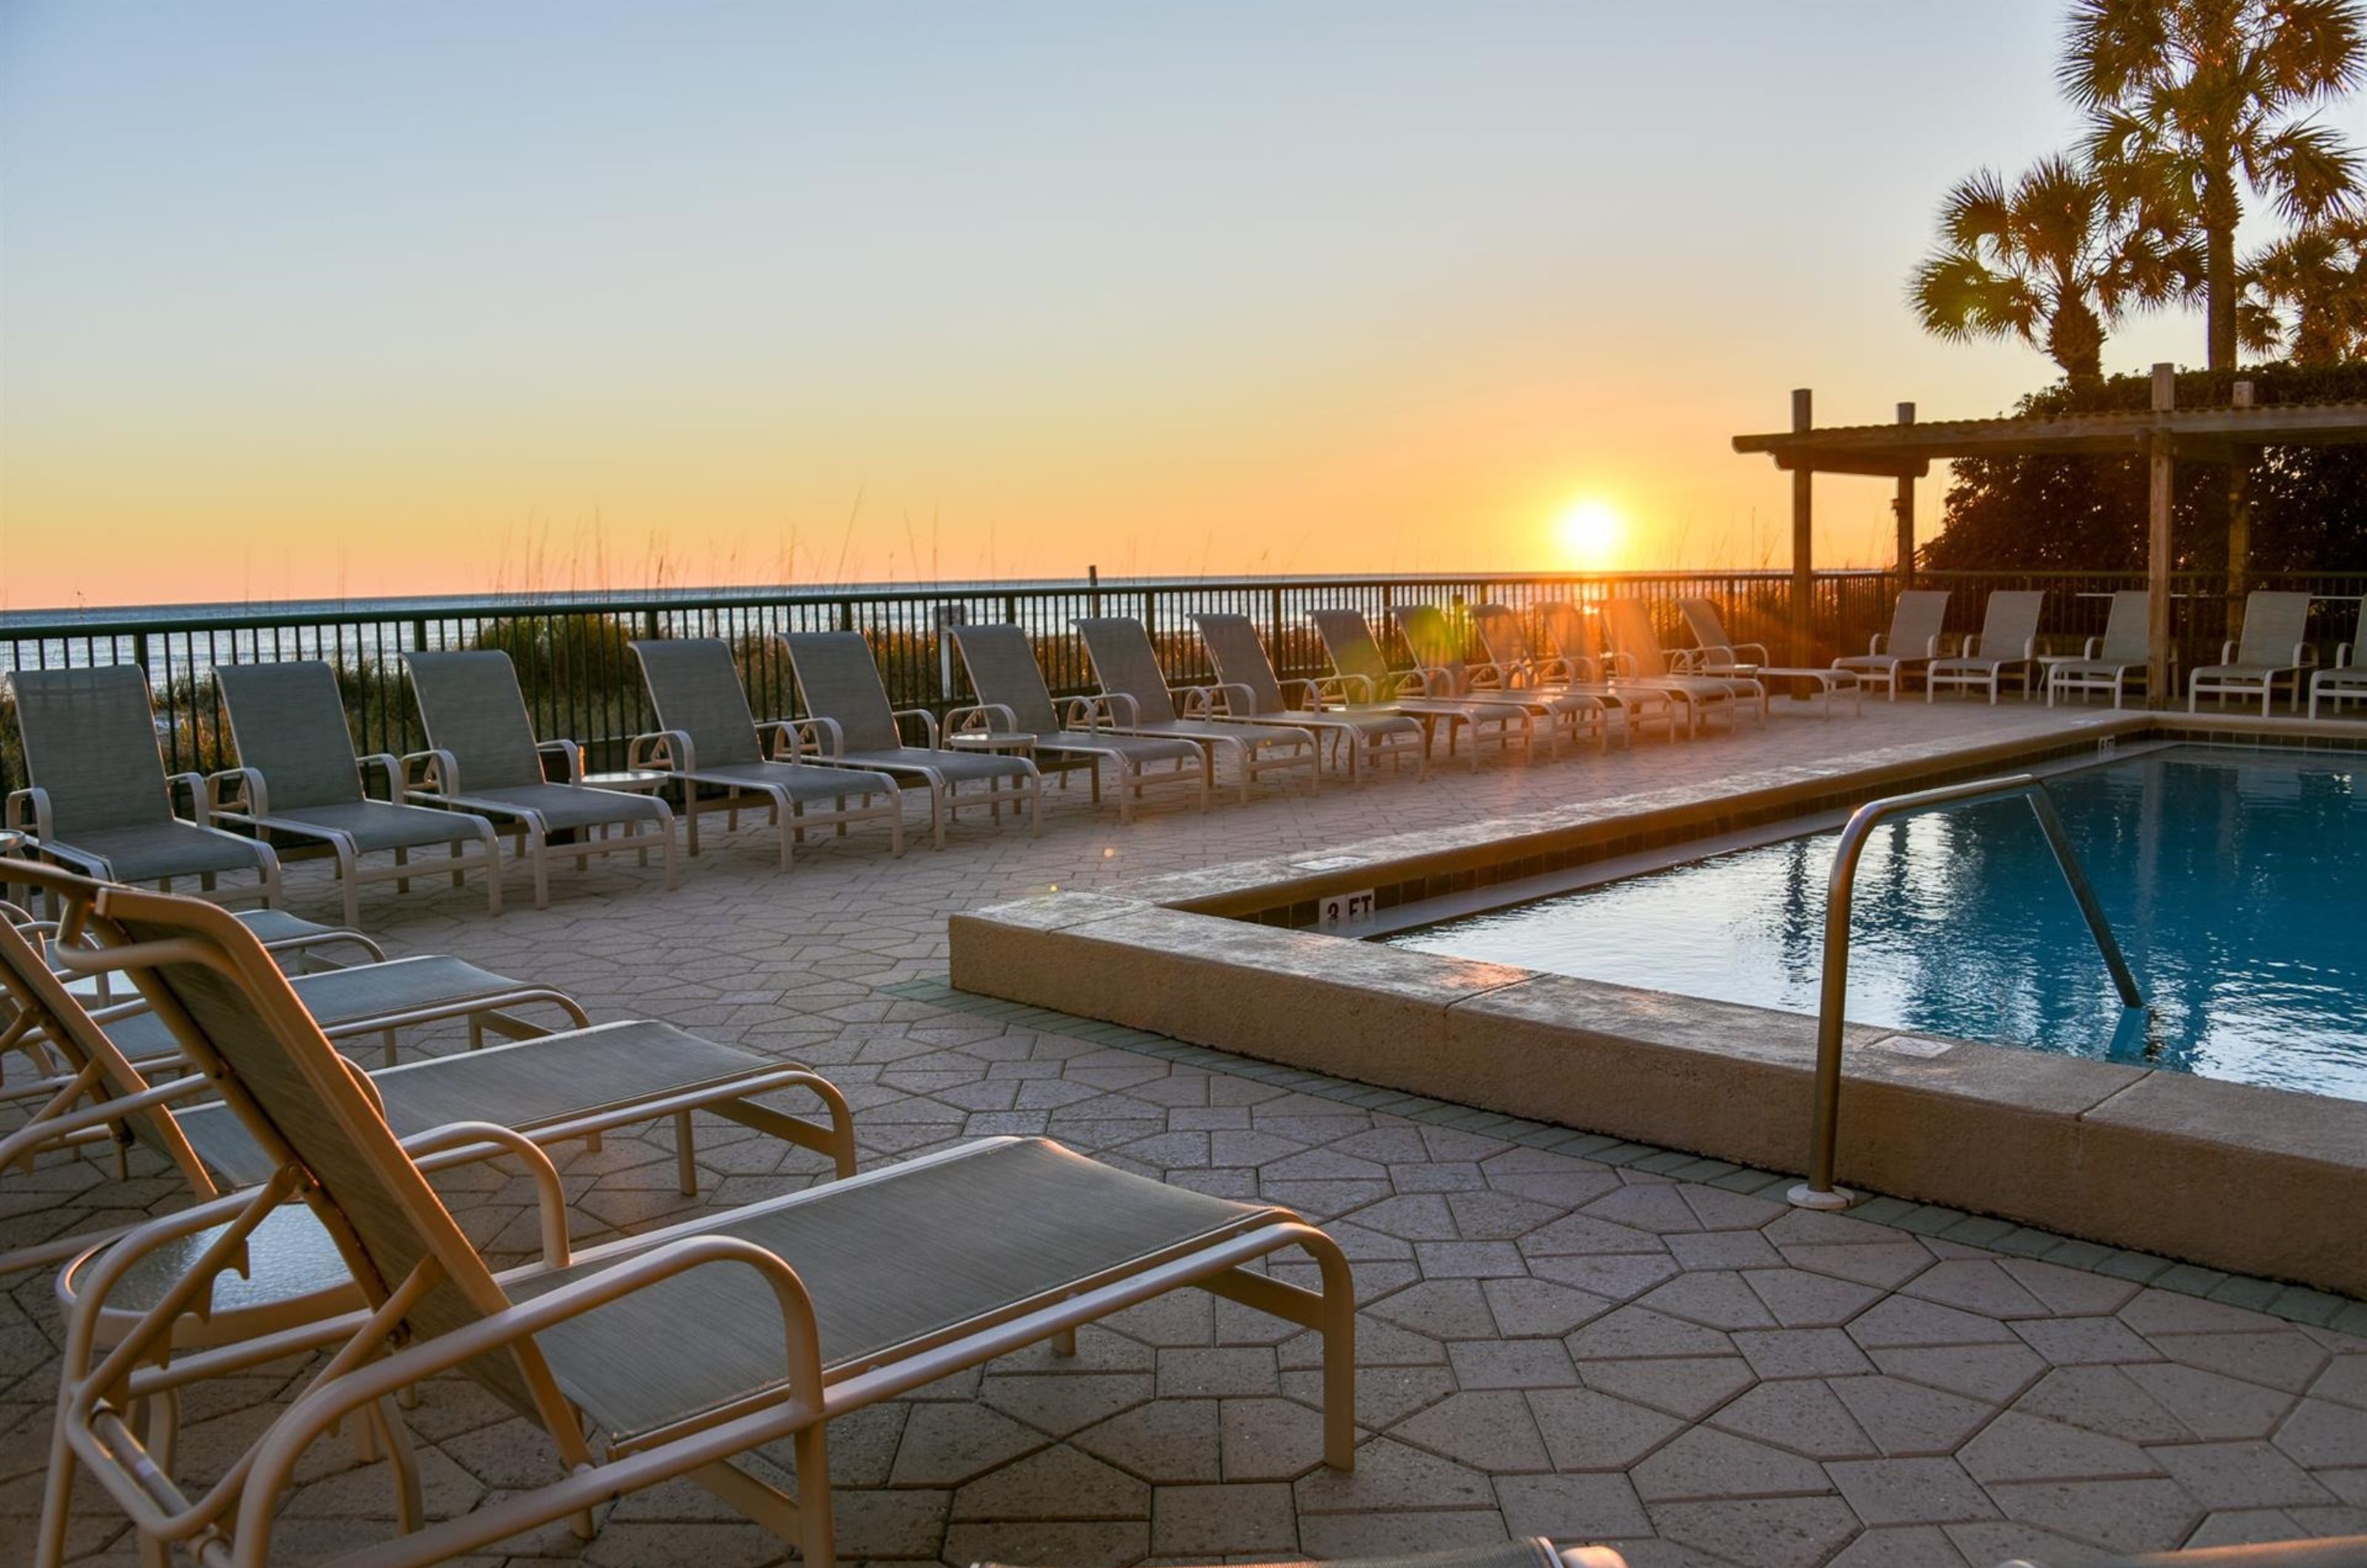 A lounge chair next to the pool at sunset at Destin Beach Club 